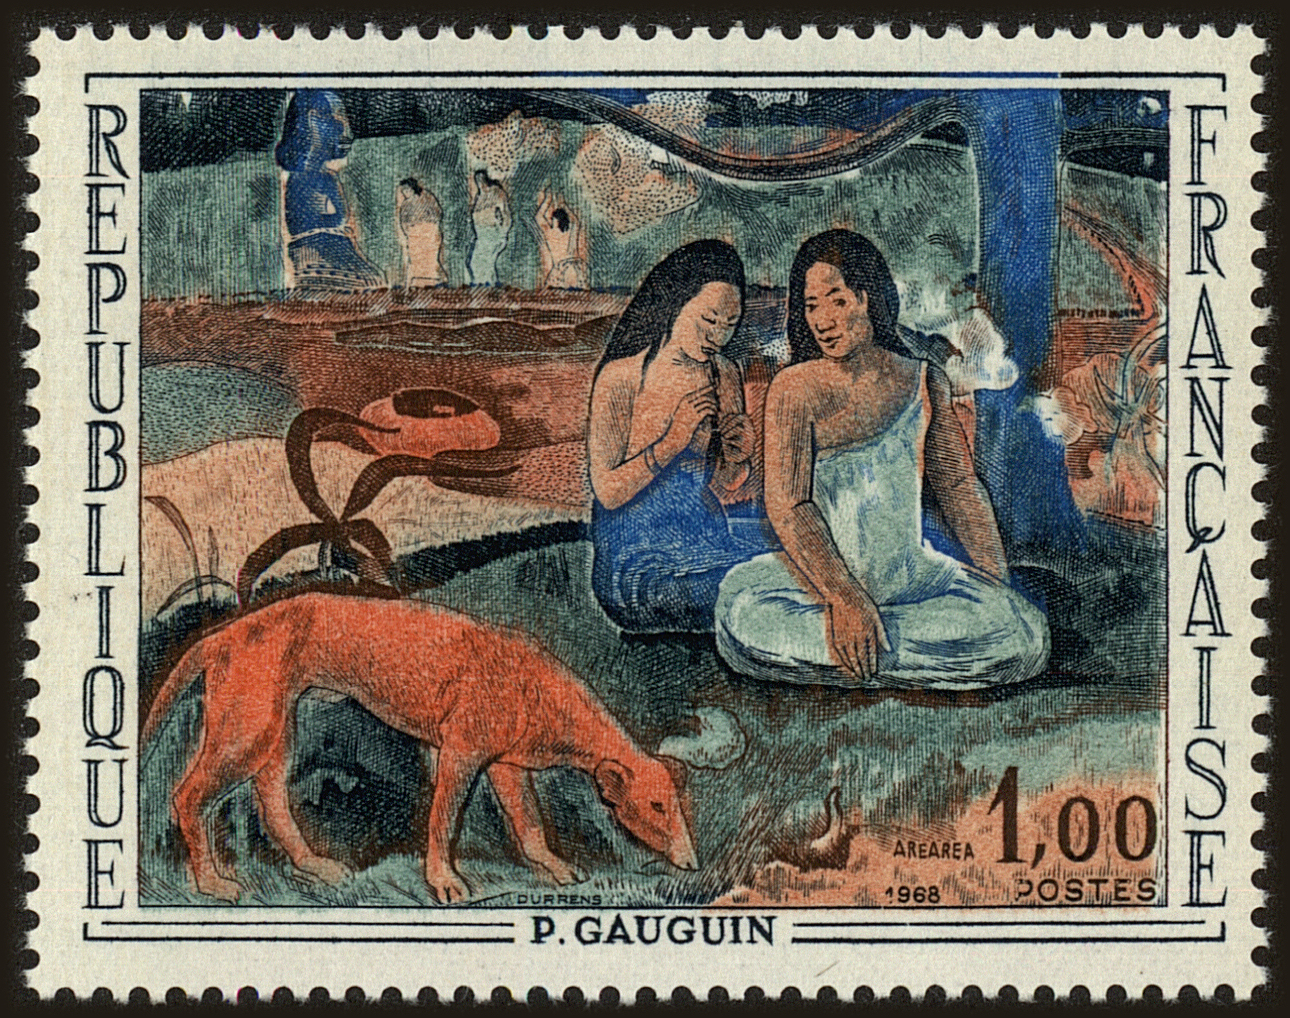 Front view of France 1205 collectors stamp